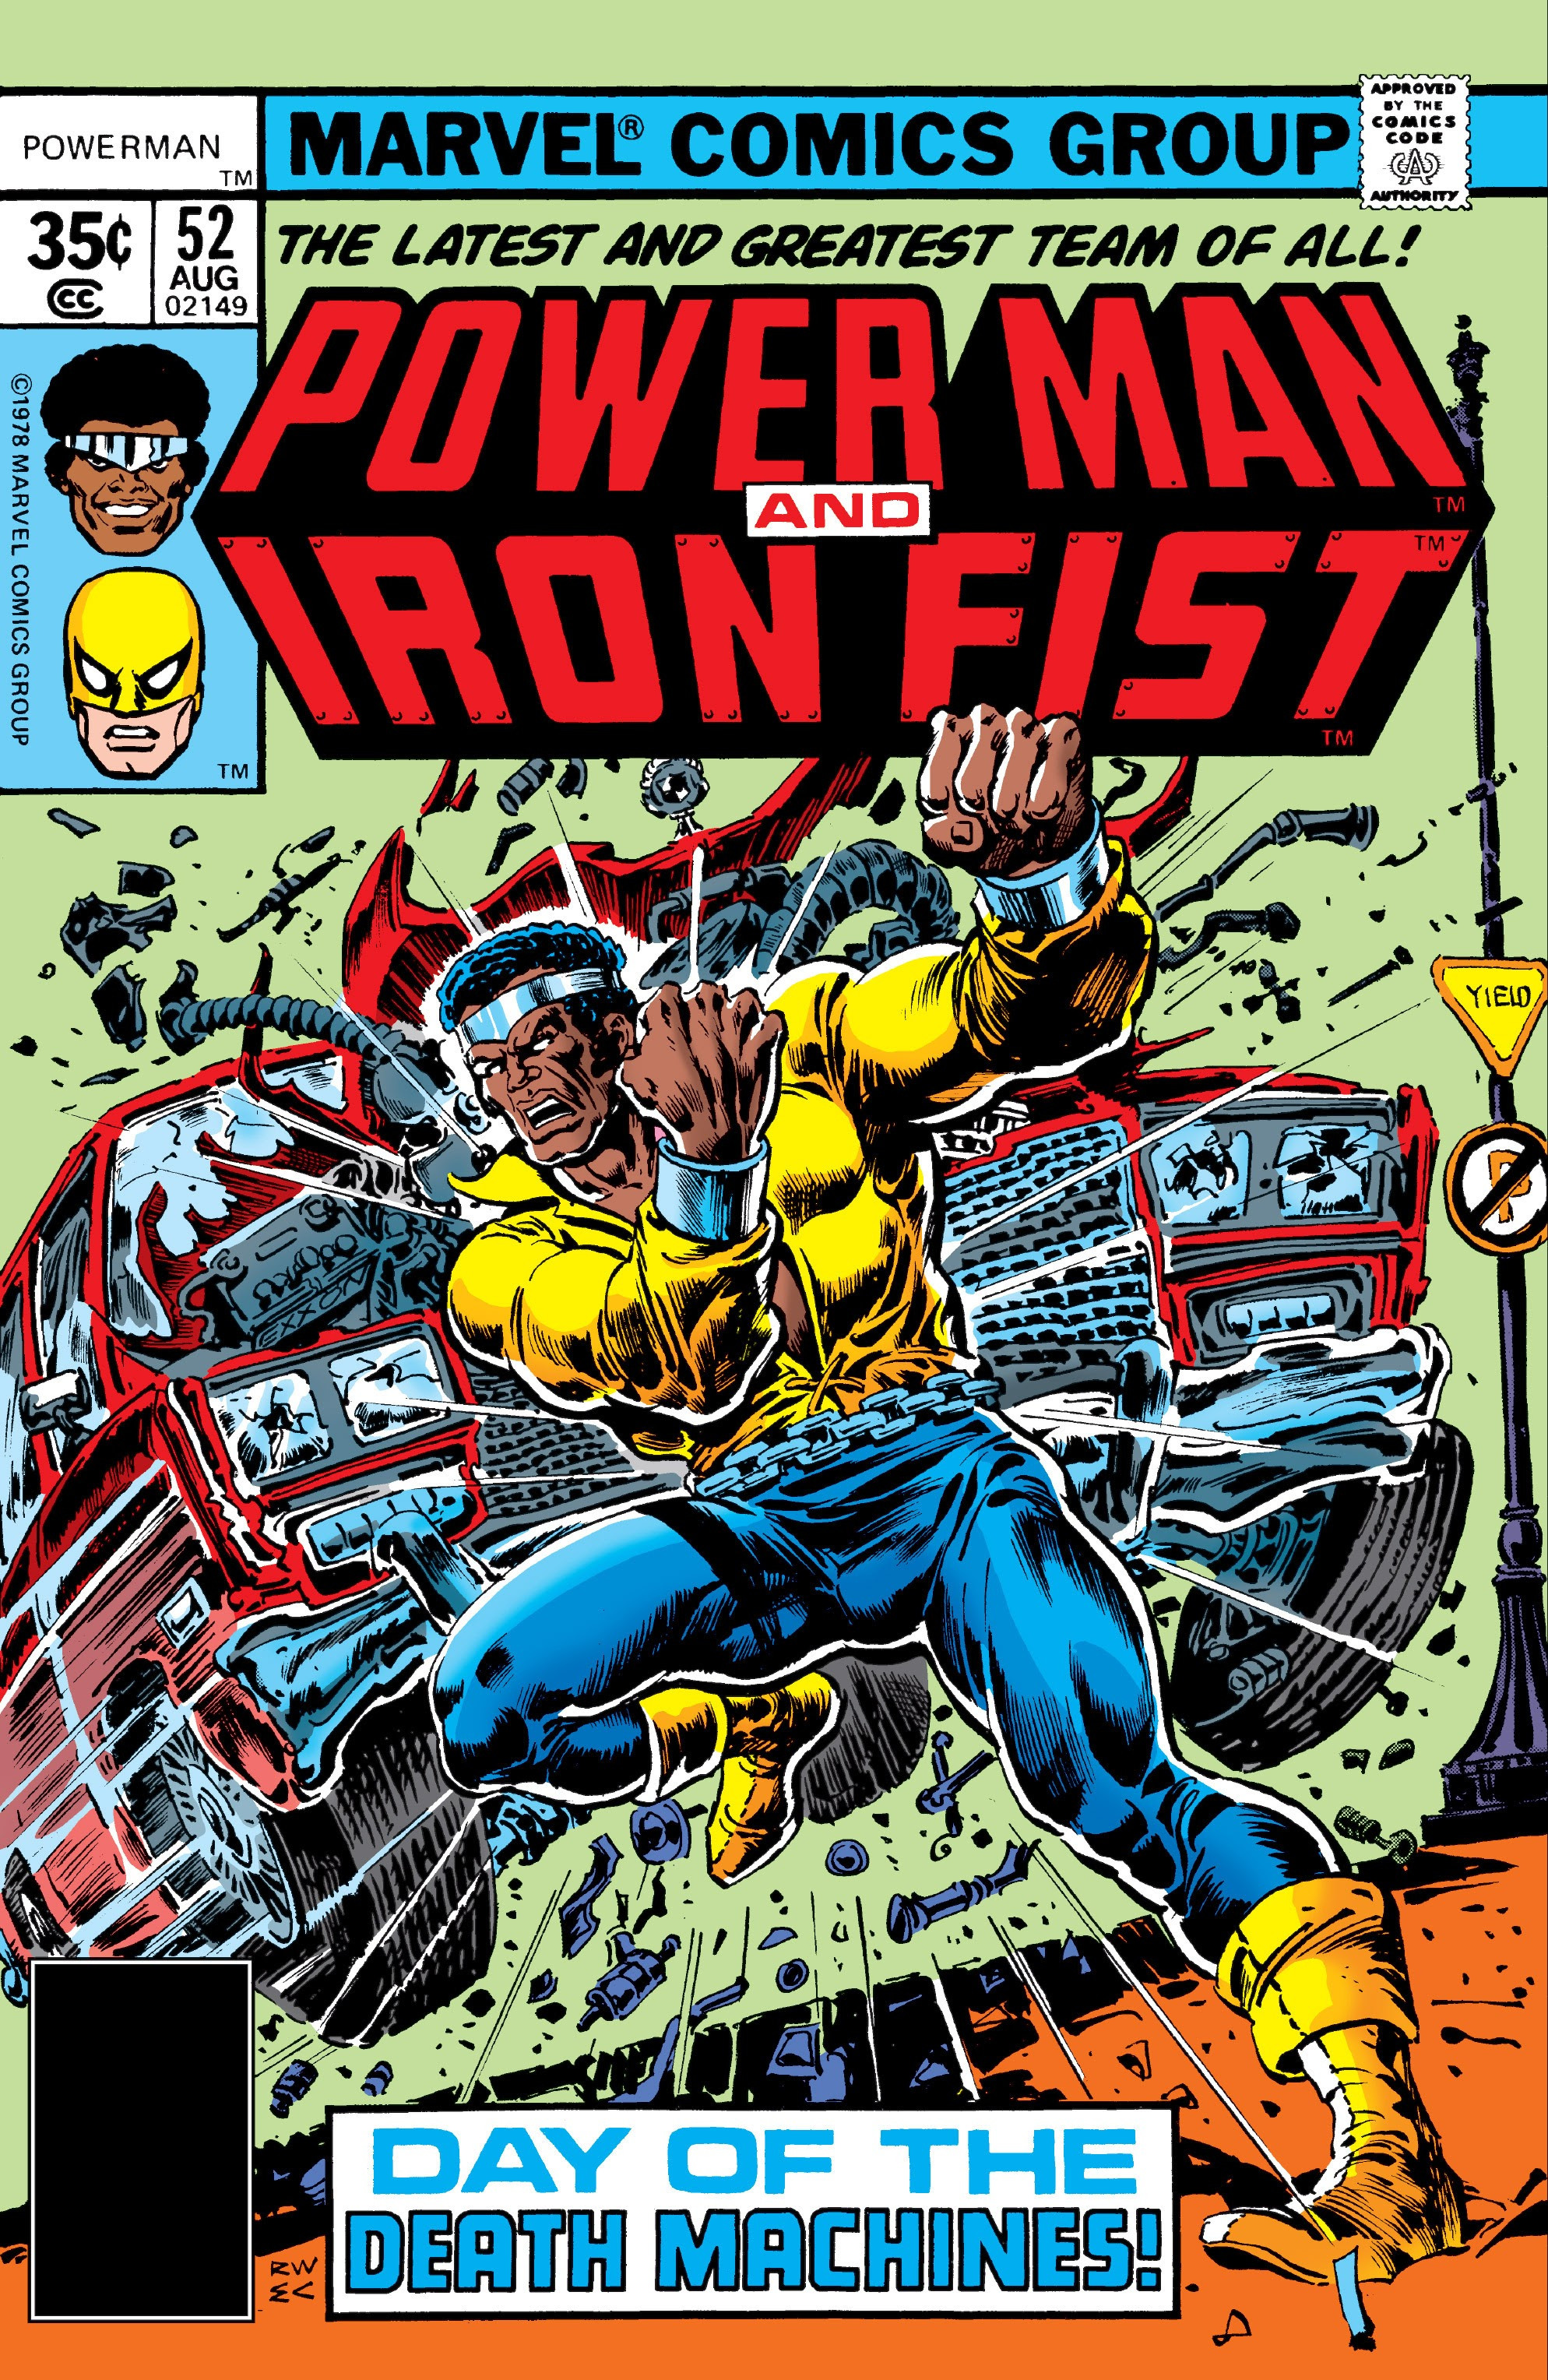 Convos with Creators: Chatting Iron Fist with Chris Claremont – I AM IRON  FIST